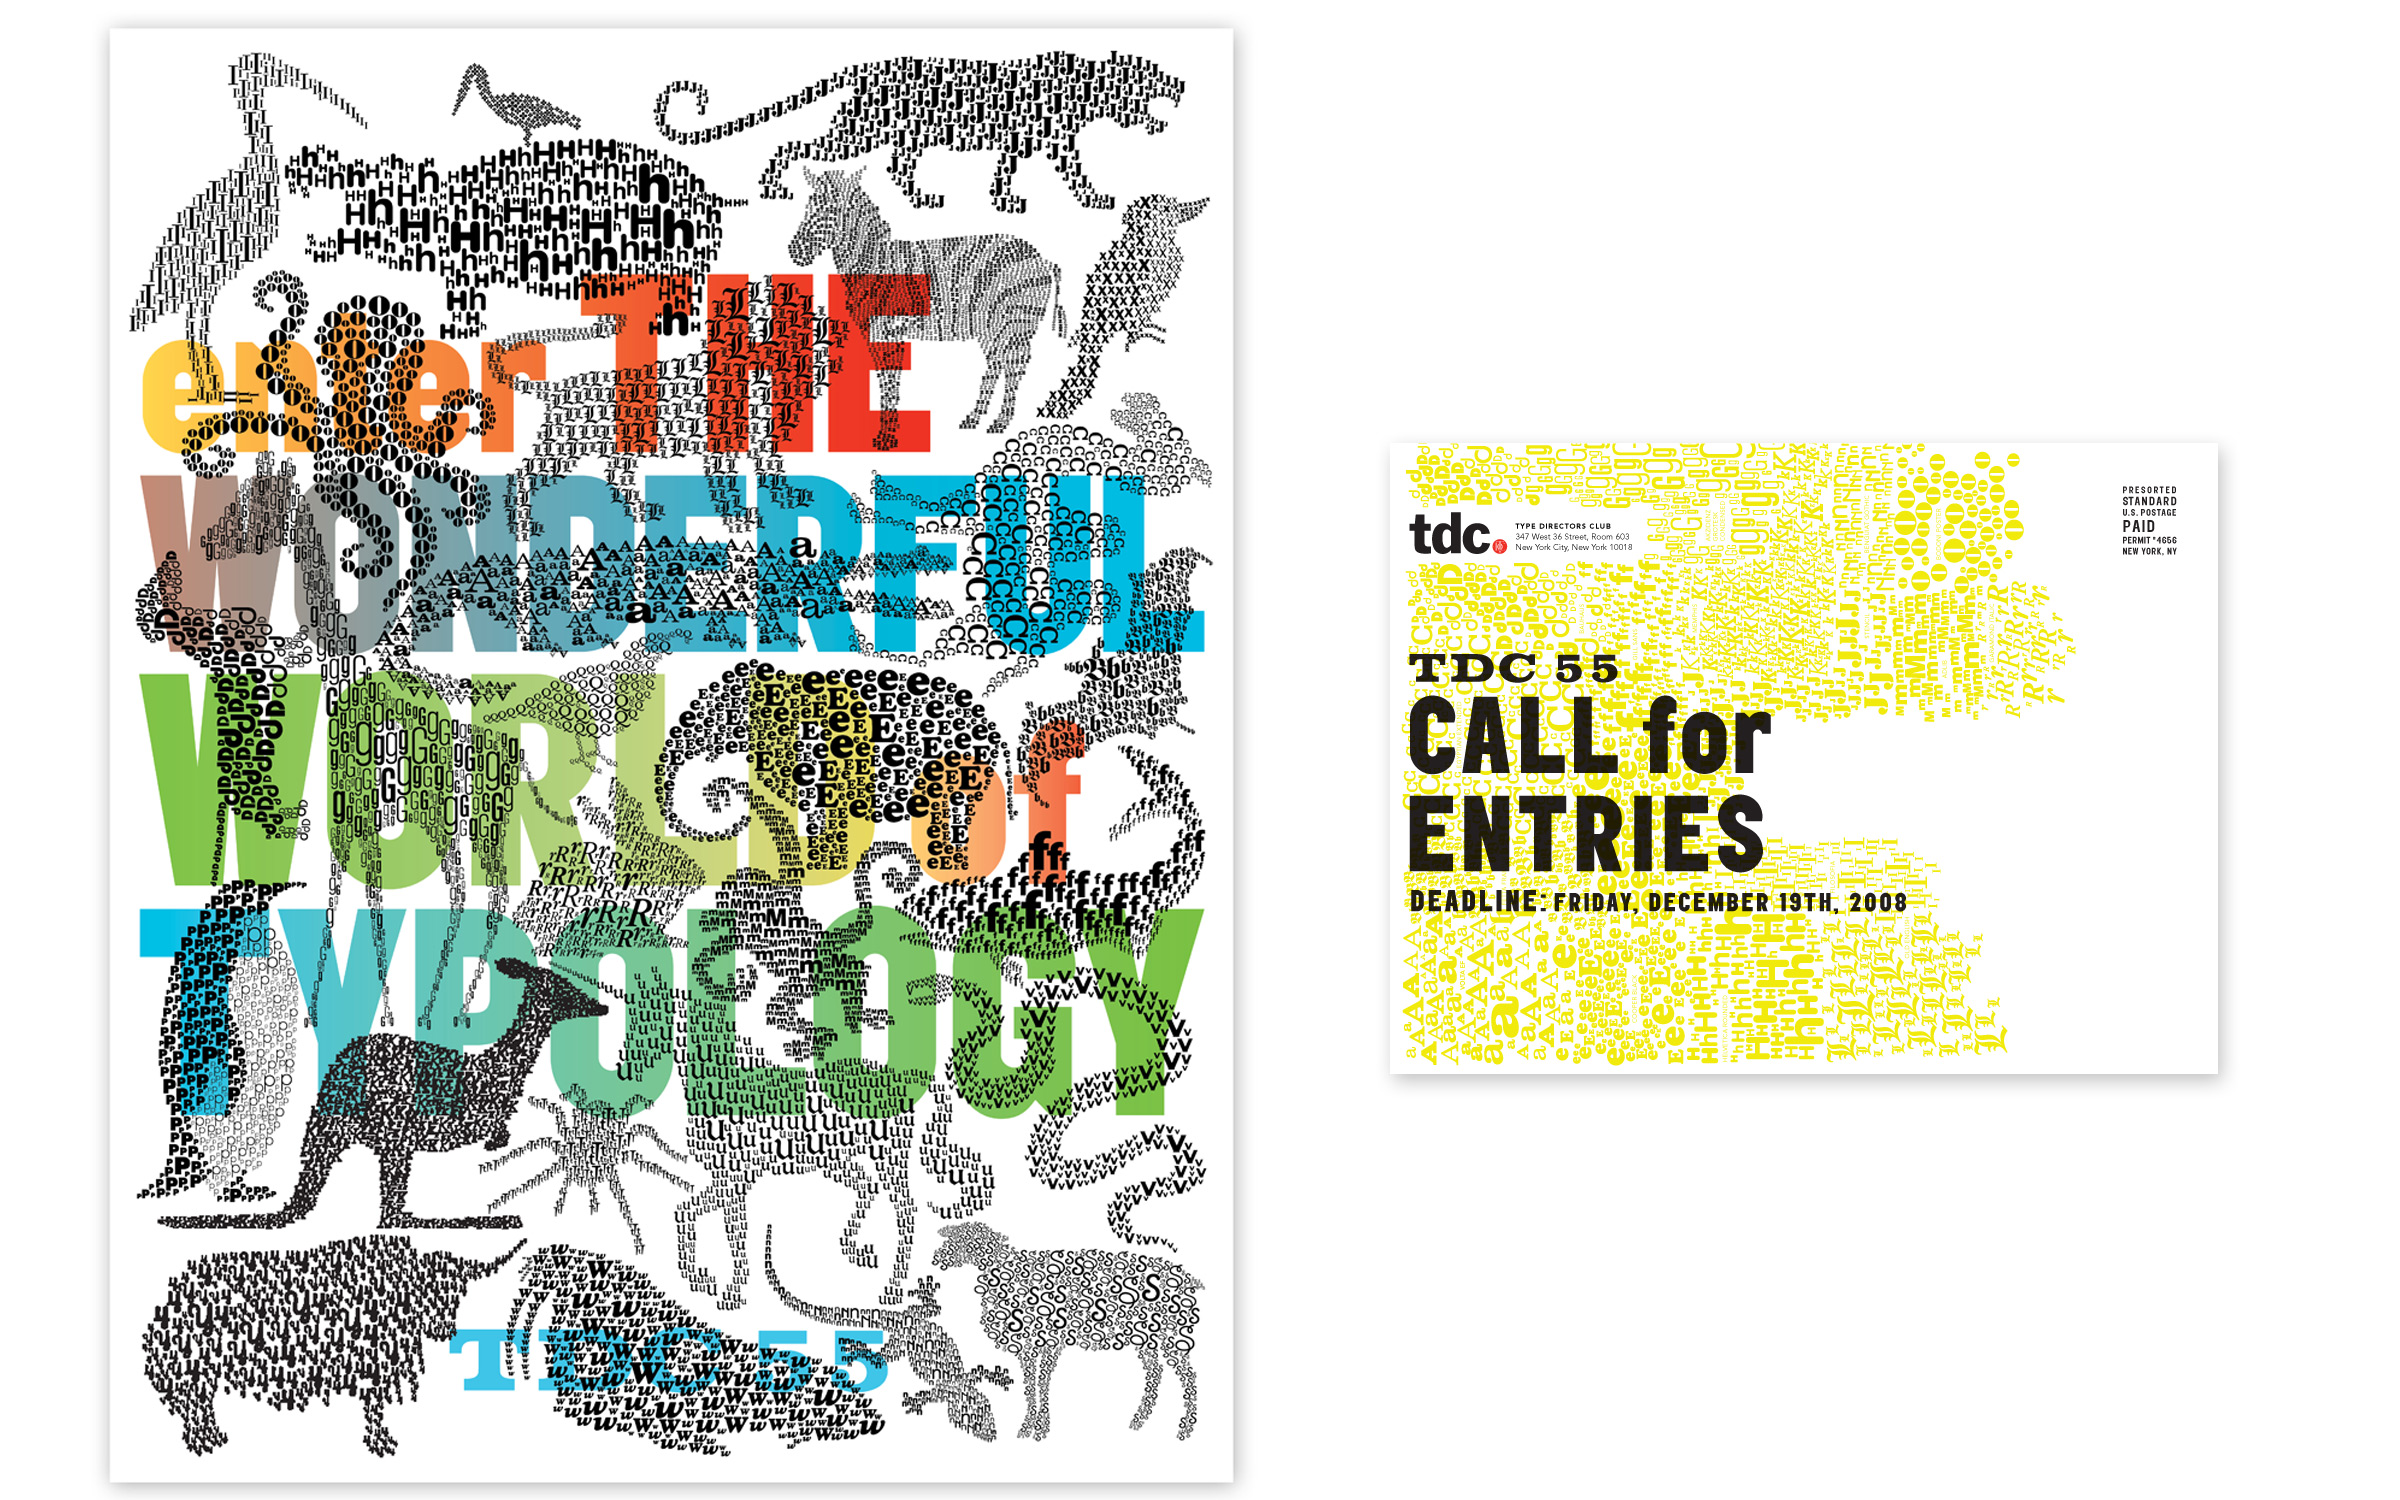 tdc-poster-callentries